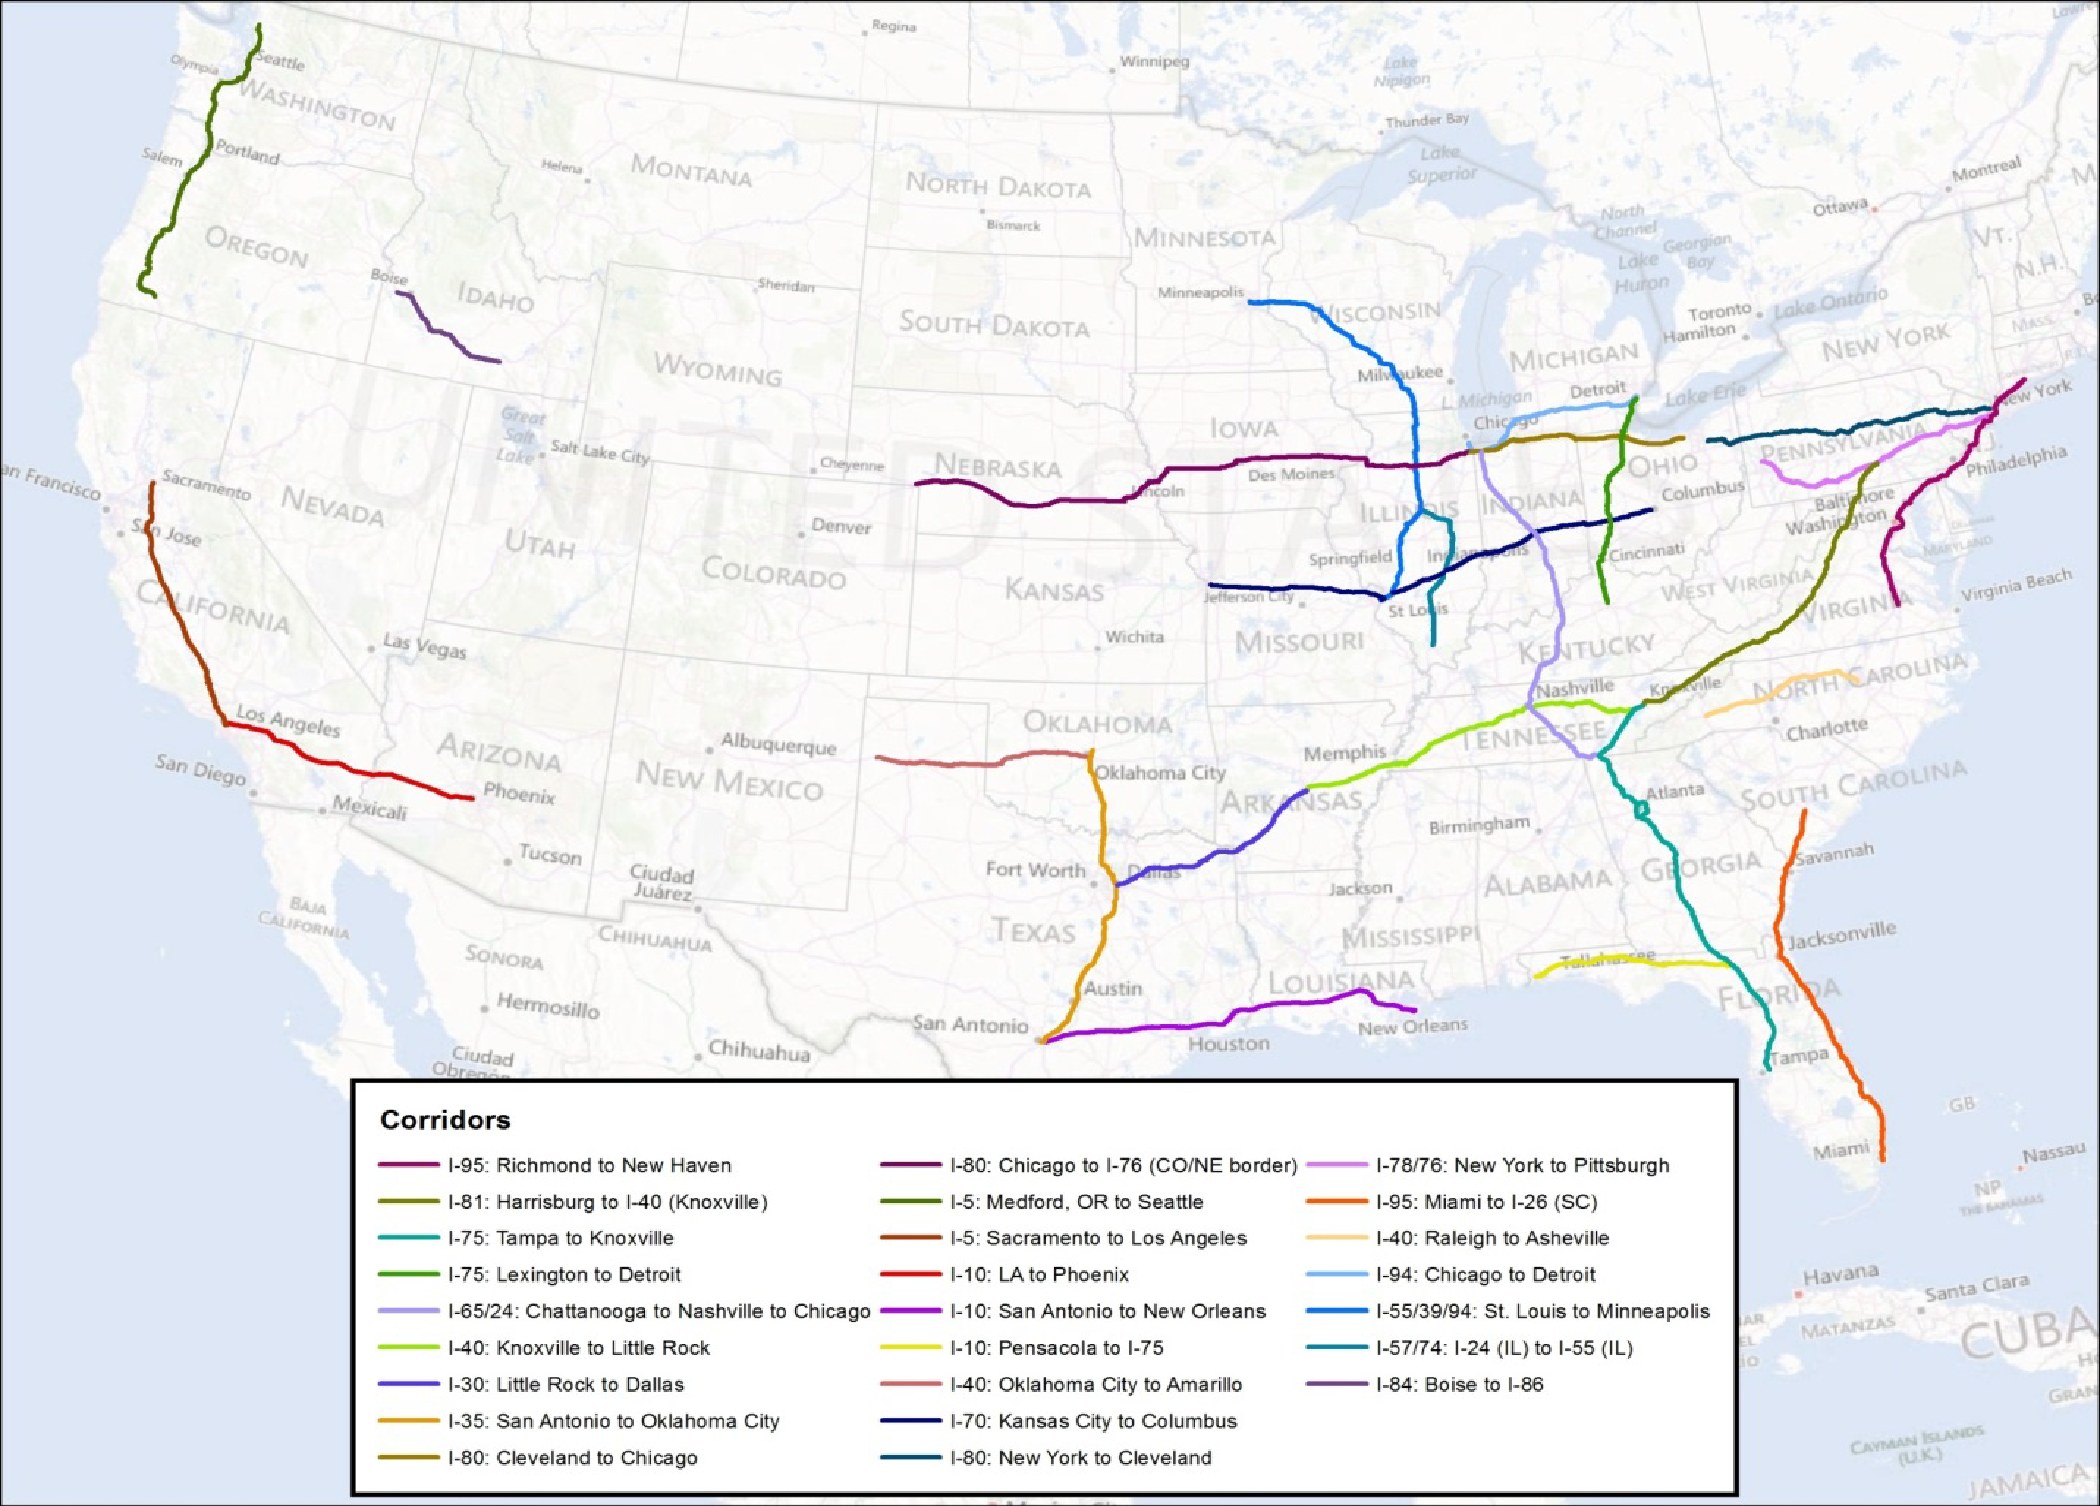 An outline map of the 48 contiguous states show the top 25 domestic freight corridors for 2012, labeled on the map by color. I-95 from Richmond, VA to New Haven, CT is indicated by a magenta line. I-81 from Harrisburg, PA to I-40 (Knoxville, TN) is indicated by an olive green line. I-75 from Tampa, FL to Knoxville, TN is shown as a teal line. I-75 from Lexington, KY to Detroit, MI is indicated by a green line. I-65/24 from Chattanooga, TN to Nashville, TN to Chicago is indicated by a lavender line. I-40 from Knoxville, TN to Little Rock, AR is indicated by a lime green line. I-30 from Little Rock, AR to Dallas, TX is indicated by a purple line. I-35 from San Antonio, TX to Oklahoma City, OK is indicated by an orange line. I-80 from Cleveland, OH to Chicago, IL is indicated by a yellow/brown line. I-80 from Chicago, IL to I-76 (Colorado/Nebraska border) is indicated by a magenta/purple line. I-5 from Medford, OR to Seattle, WA is indicated by a dark green line. I-5 from Sacramento, CA to Los Angeles, CA is indicated by a dark red line. I-10 from Los Angeles, CA to Phoenix, AZ is indicated by a bright red line. I-10 from San Antonio, TX to New Orleans, LA is indicated by a light purple line. I-10 from Pensacola, FL to I-75 is indicated by a bright yellow line. I-40 from Oklahoma City, OK to Amarillo, TX is indicated by a brown line. I-70 from Kansas City, MO to Columbus, OH is indicated by a darker purple/blue line. I-80 from New York to Cleveland, OH is indicated by a dark teal line. I-78/76 from New York to Pittsburgh, PA is indicated by a pink line. I-95 from Miami, FL to I-26 (South Carolina) is indicated by a burnt orange line. I-40 from Raleigh, NC to Asheville, NC is indicated by a dark yellow line. I-94 from Chicago, IL to Detroit, MI is indicated by a light blue line. I-55/39/94 from St. Louis, MO to Minneapolis, MN is indicated by a turquoise line. I-57/74 from I-24 (Illinois) to I-55 (Illinois) is indicated by a light teal line. Finally, I-84 from Boise, ID to I-86 is indicated by a dull purple line. Source: FHWA Freight Management and Operations, Freight Analysis Framework and Freight Performance Measure Program, 2014.